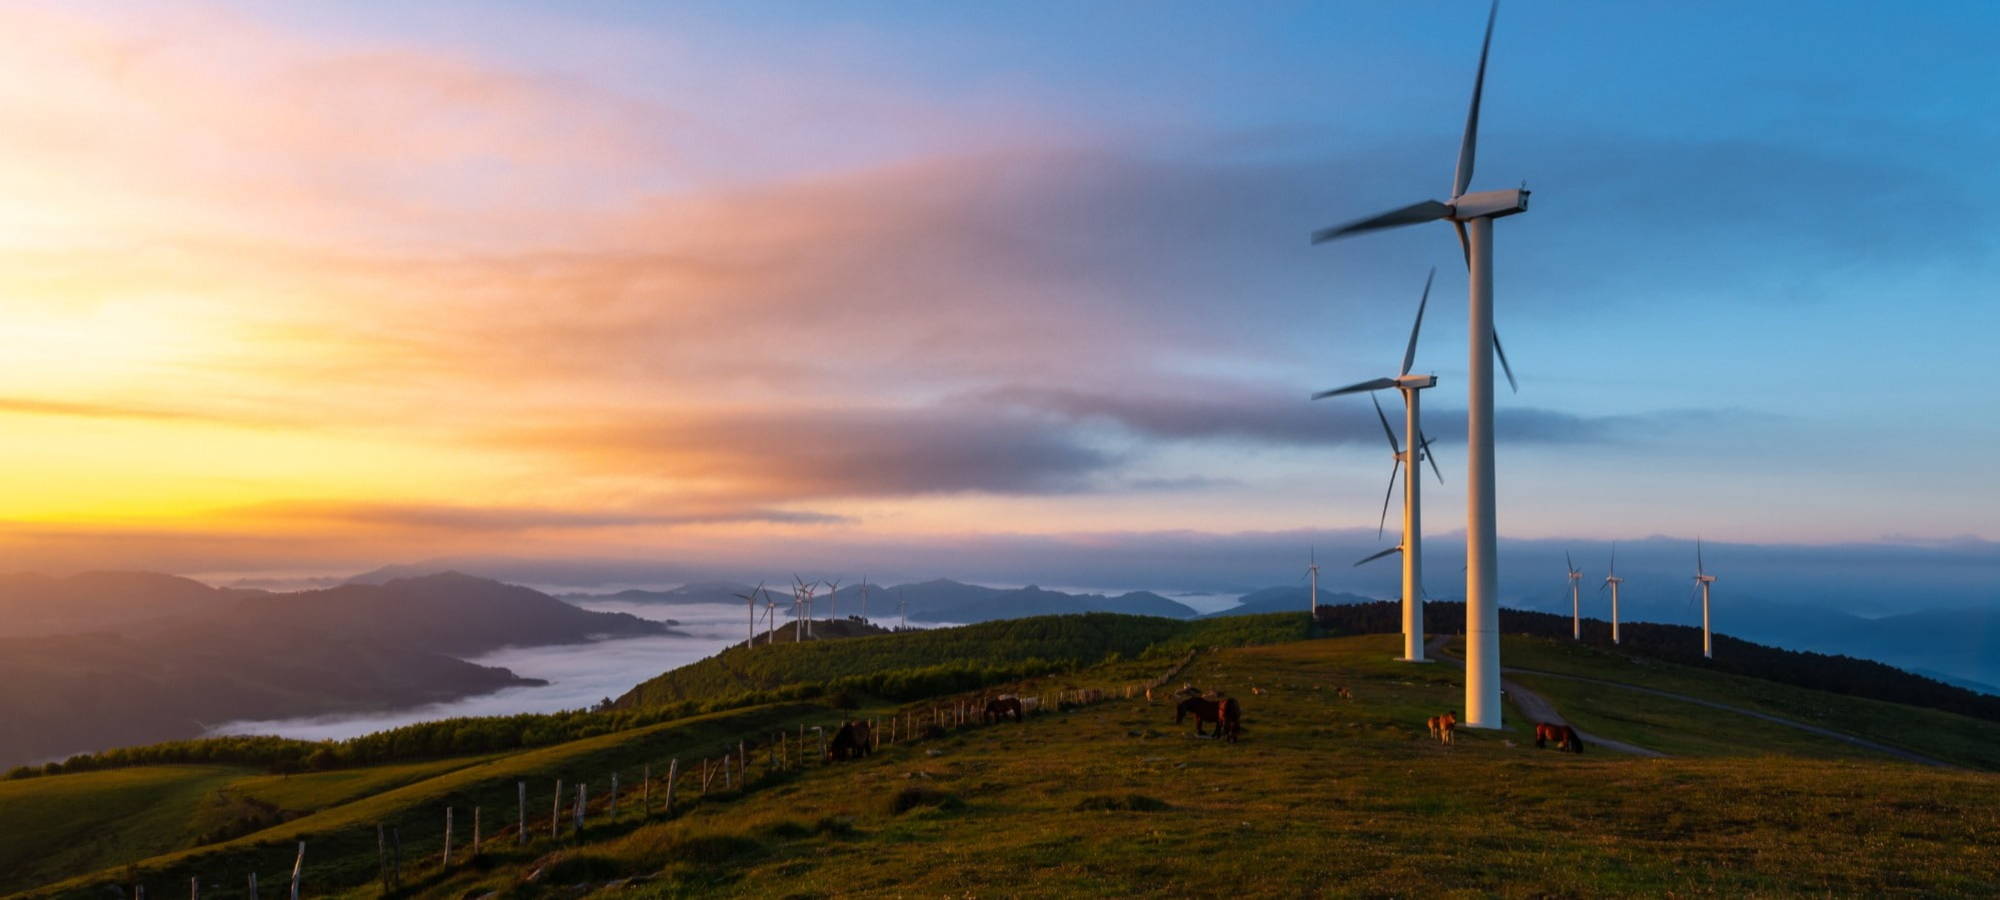 Sunset and windfarm with clouds and mountains in the back ersg